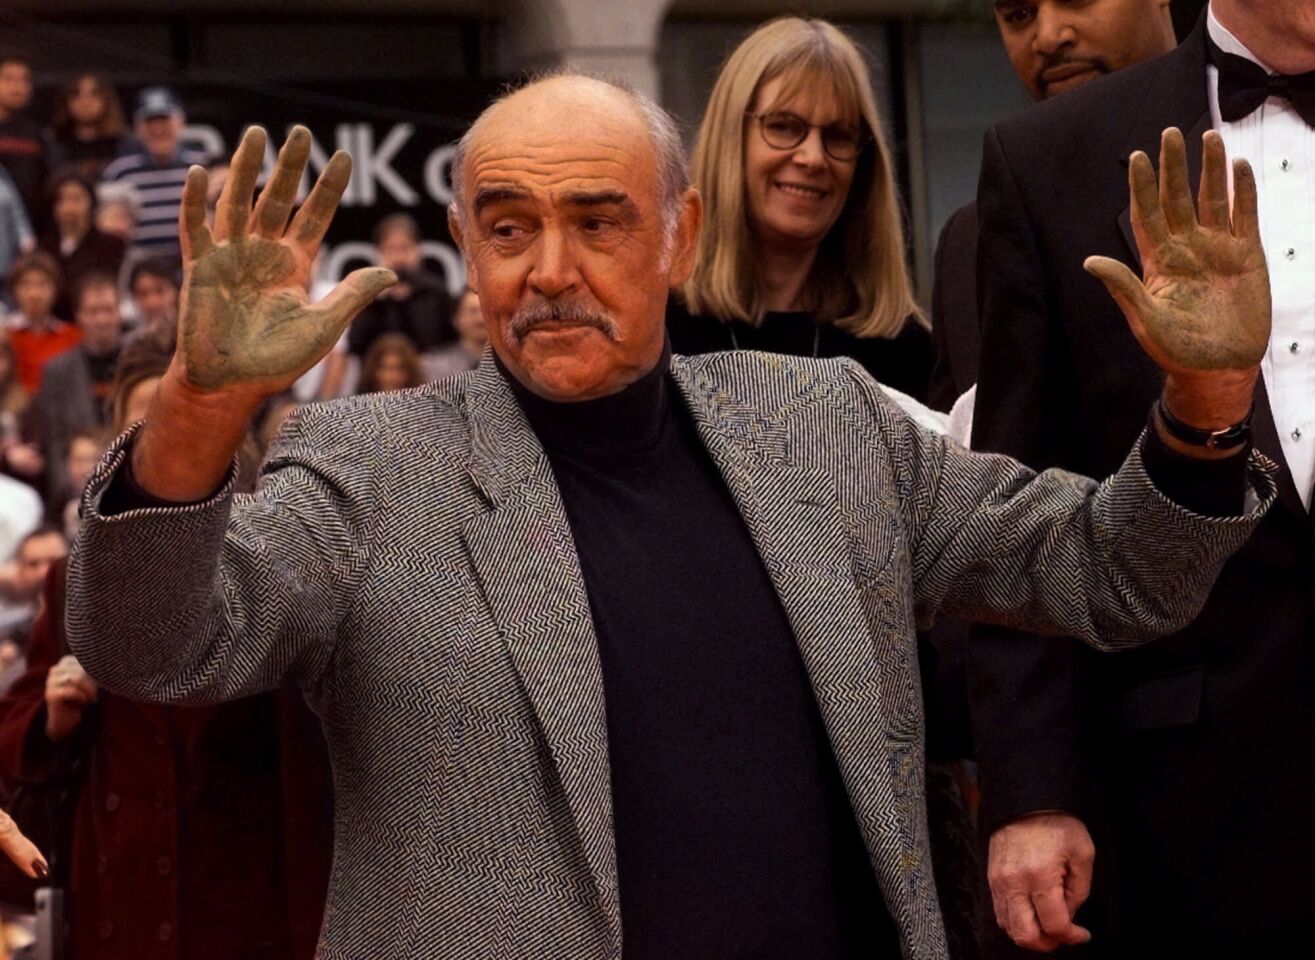 Connery shows his hands after placing his handprints in cement outside Grauman's Chinese Theatre on April 13, 1999.